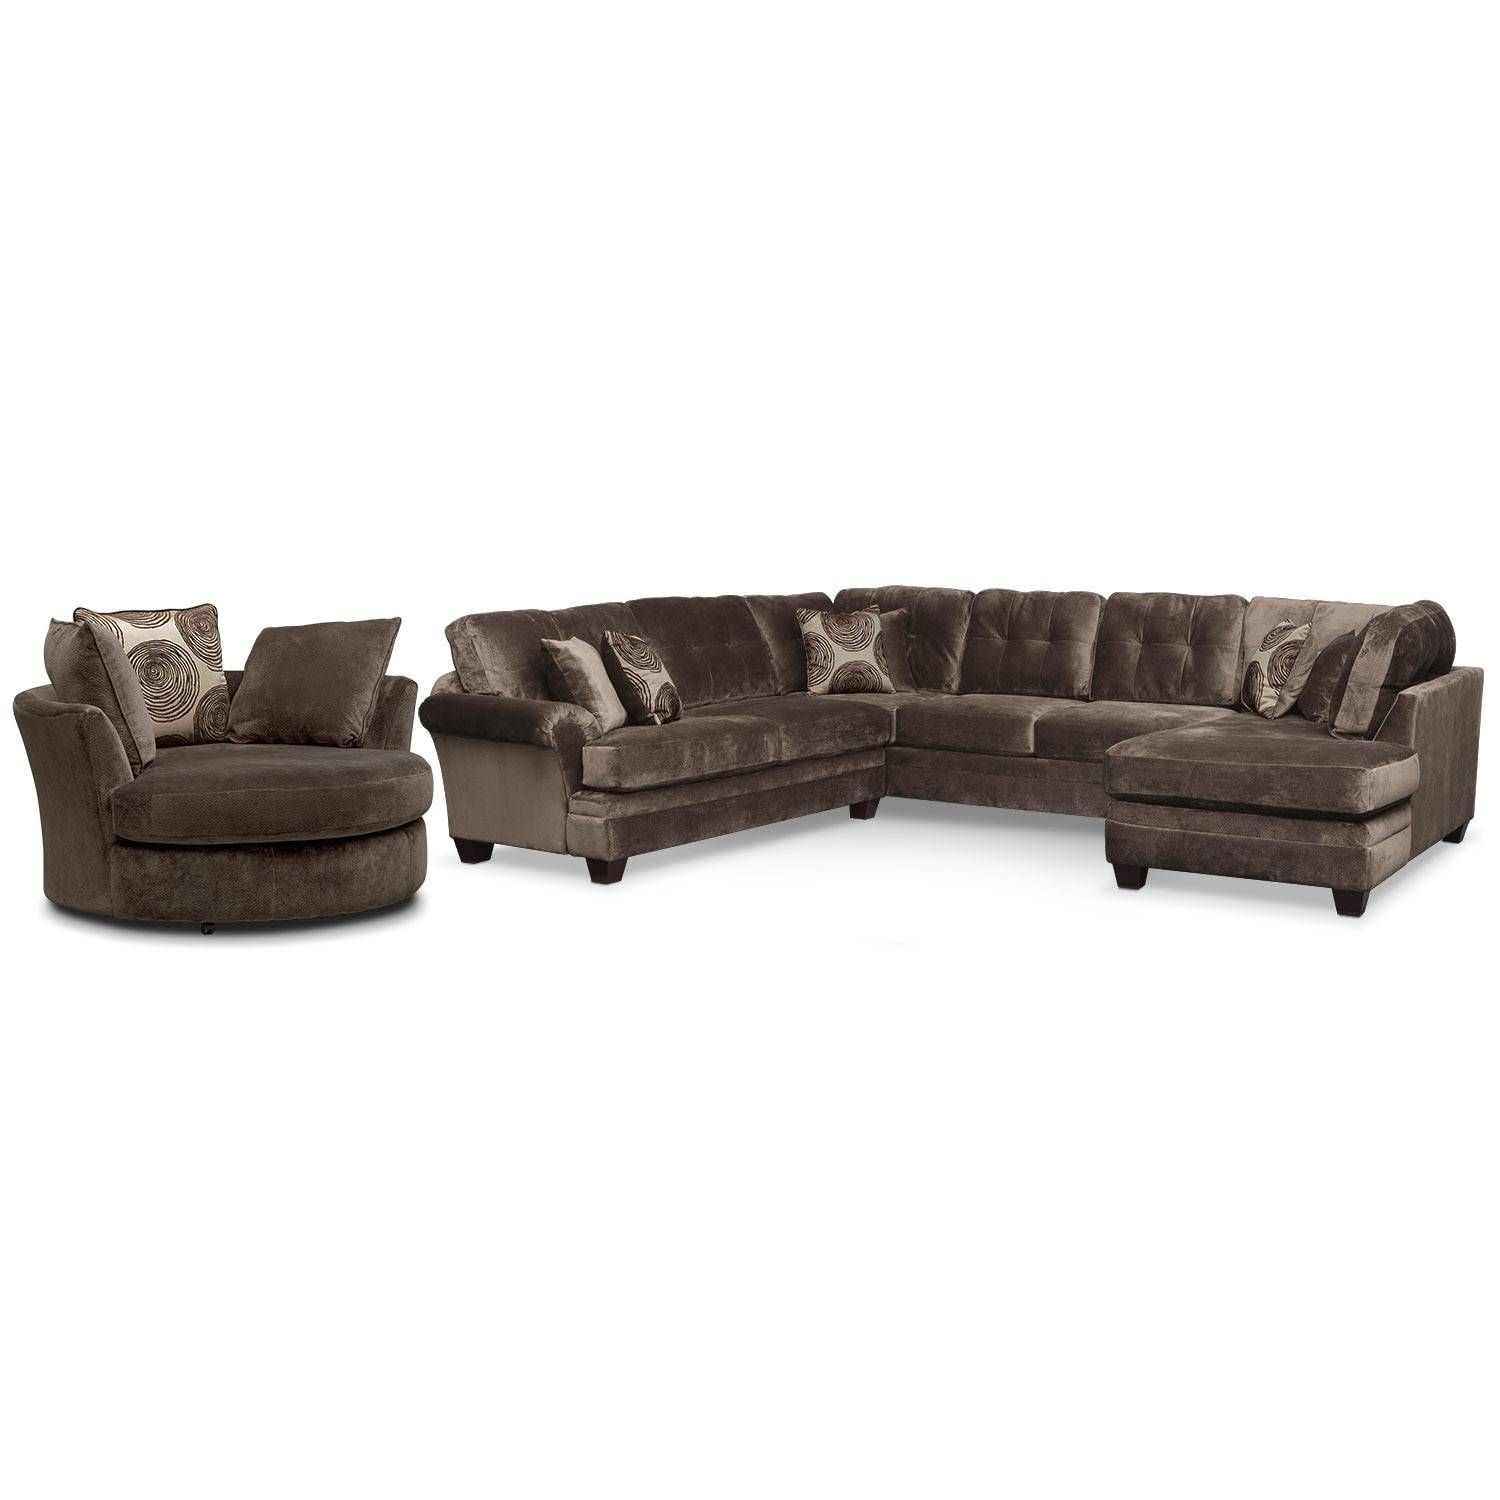 Cordelle 3 Piece Sectional And Swivel Chair Set – Chocolate With Sofa With Swivel Chair (Photo 24 of 30)